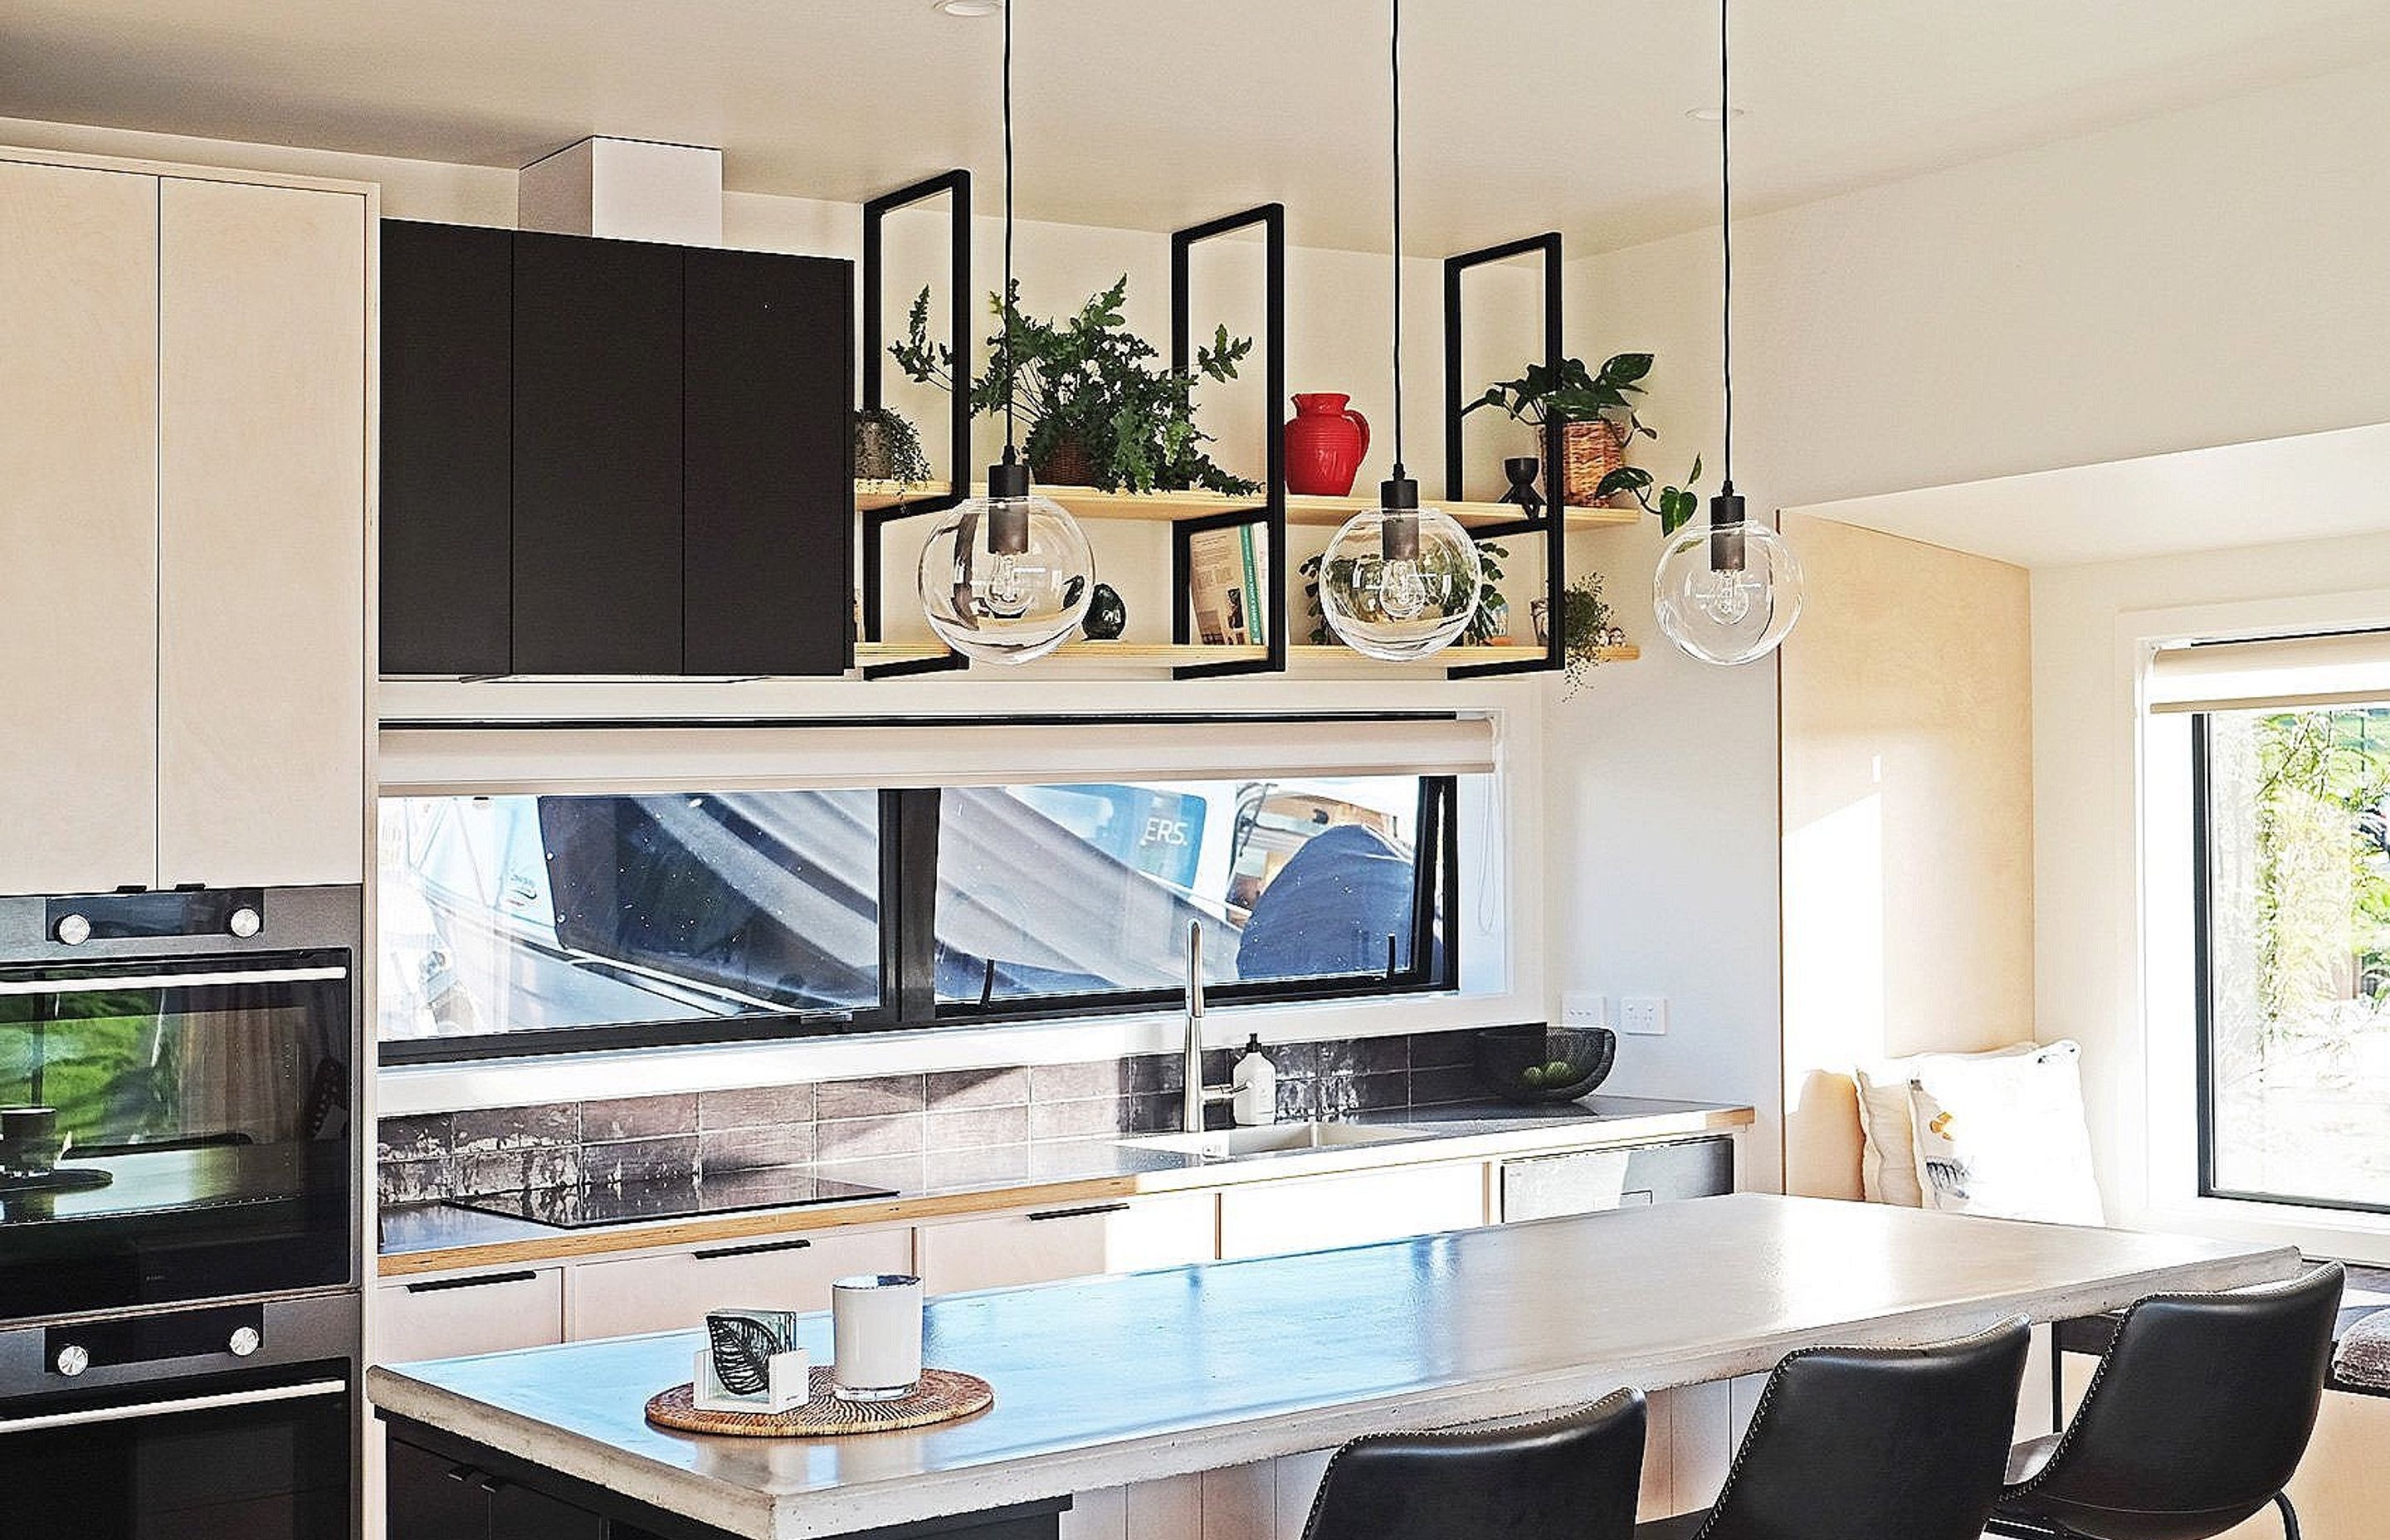 A Modern Kitchen in White and Black